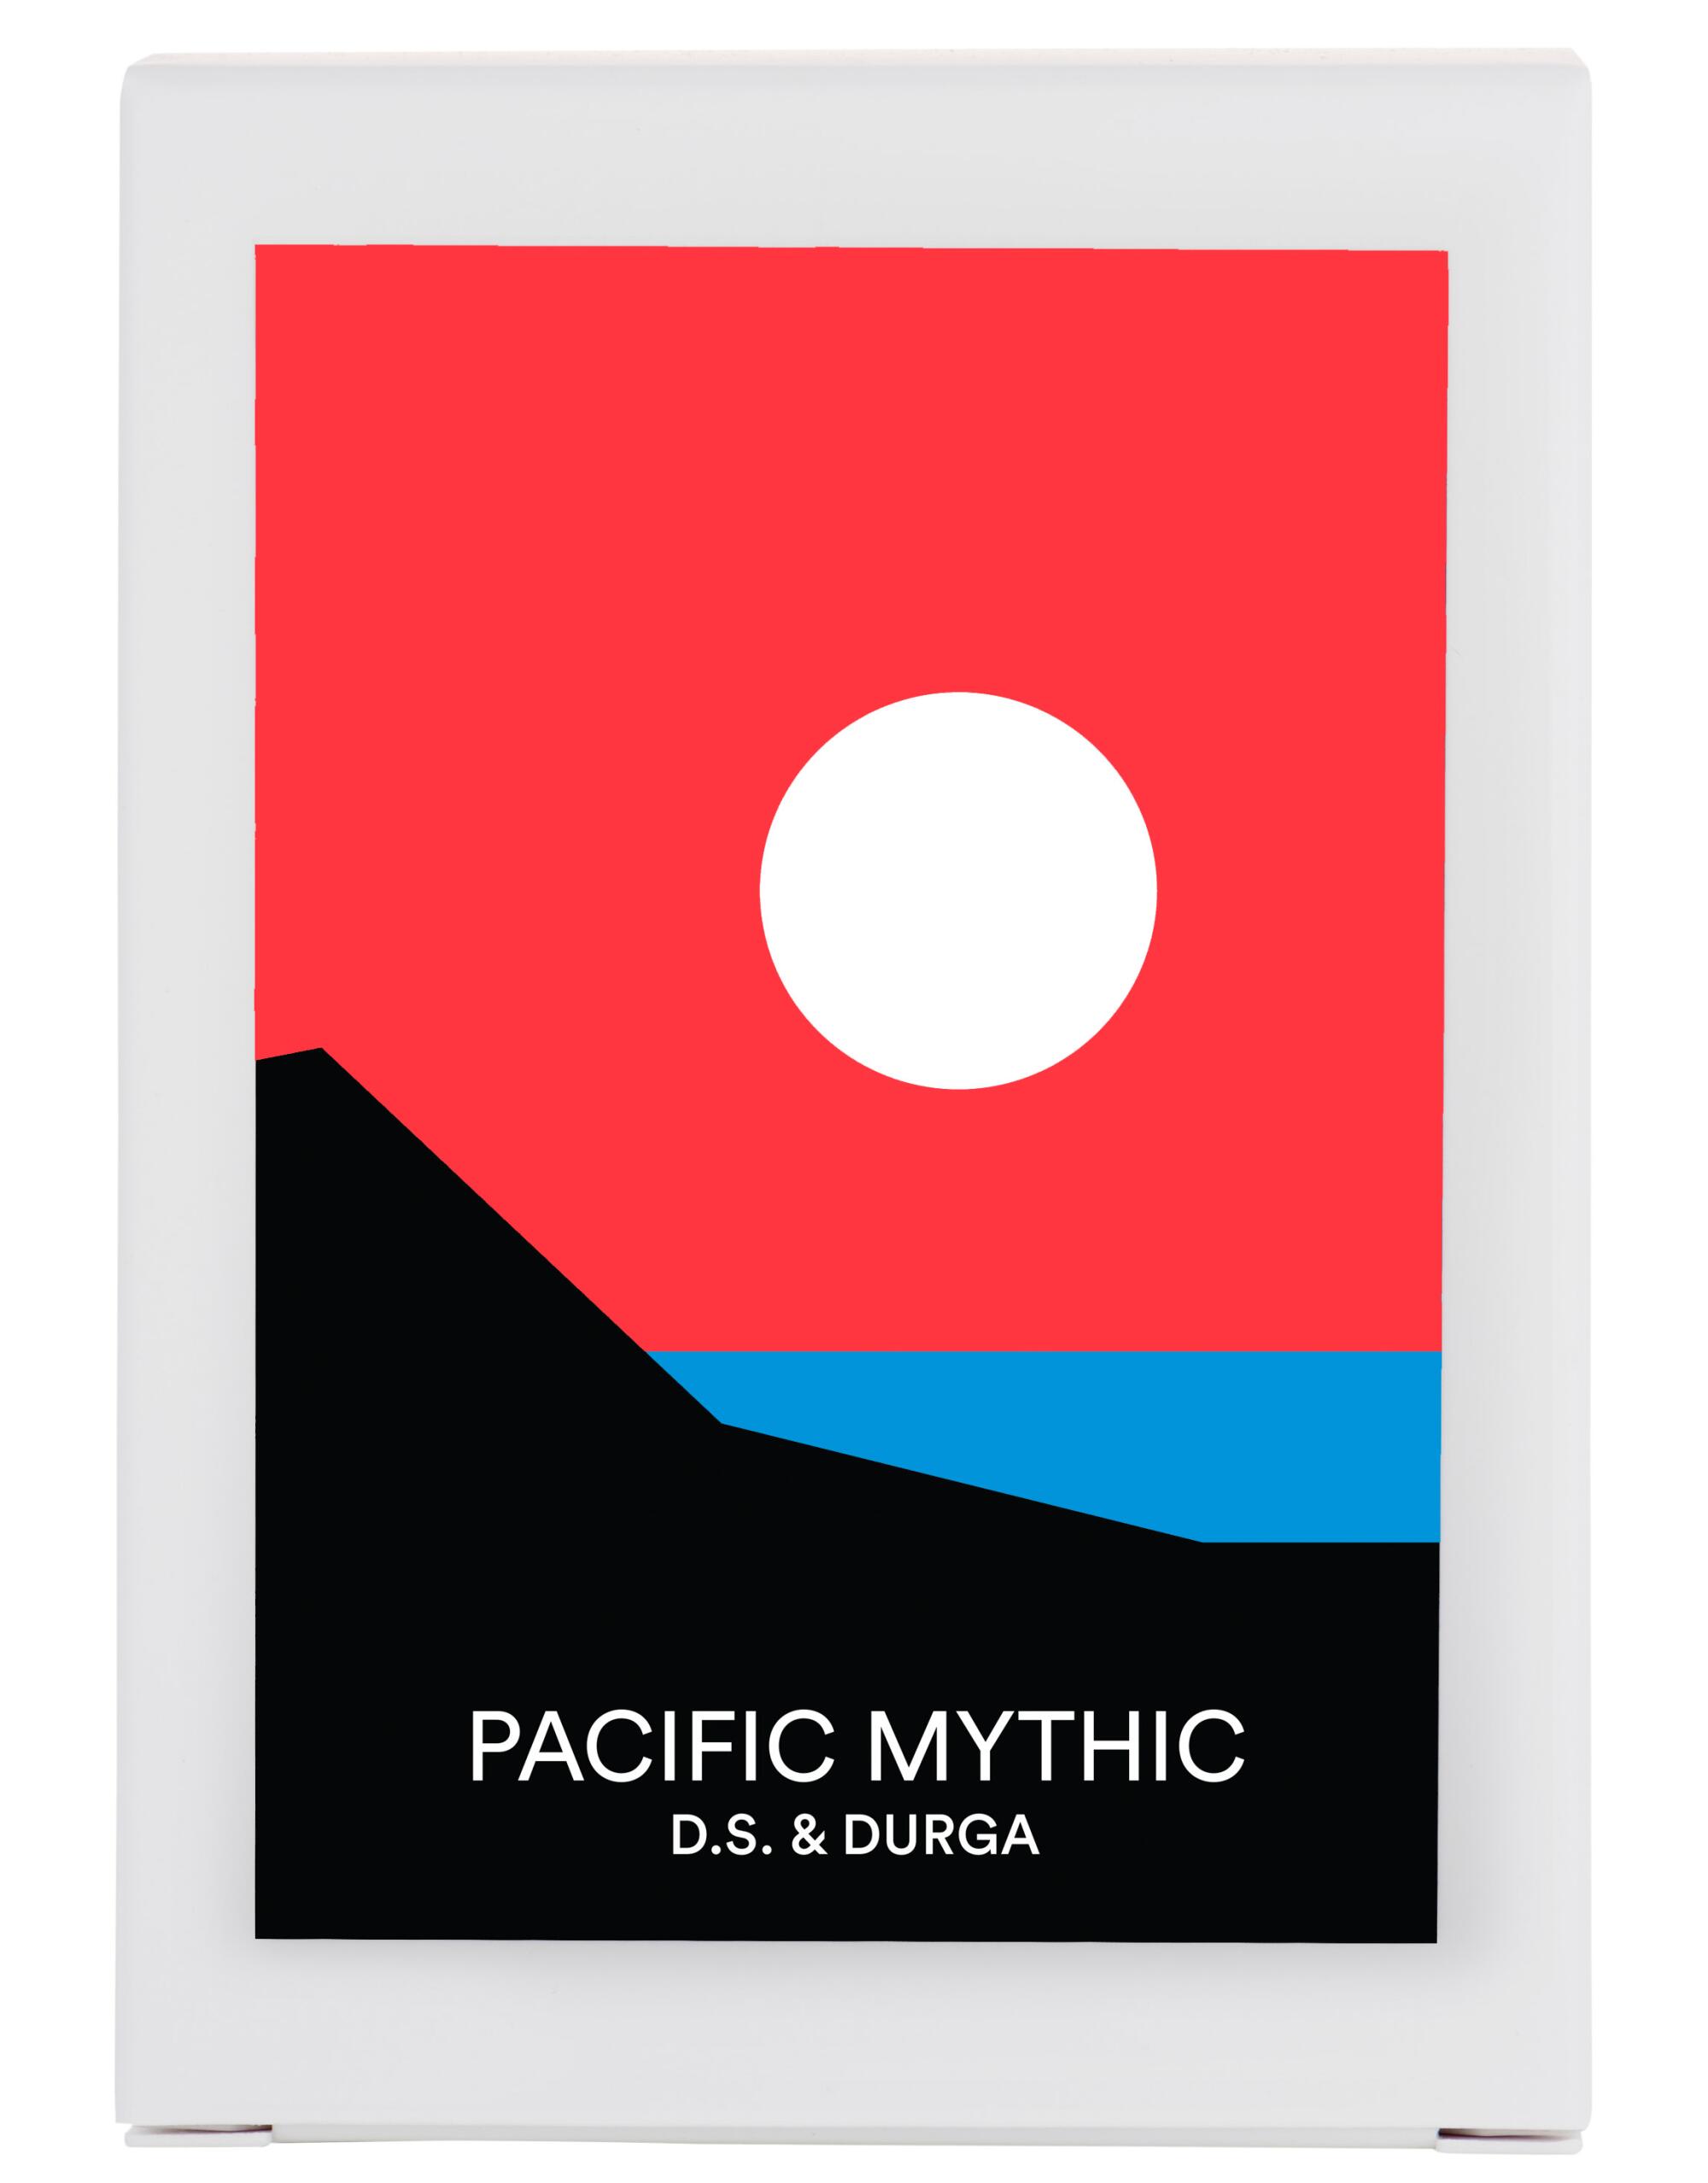 Pacific Mythic by D.S. & Durga candle packaging shows a white moon in a red sky over a blue sea and black hill